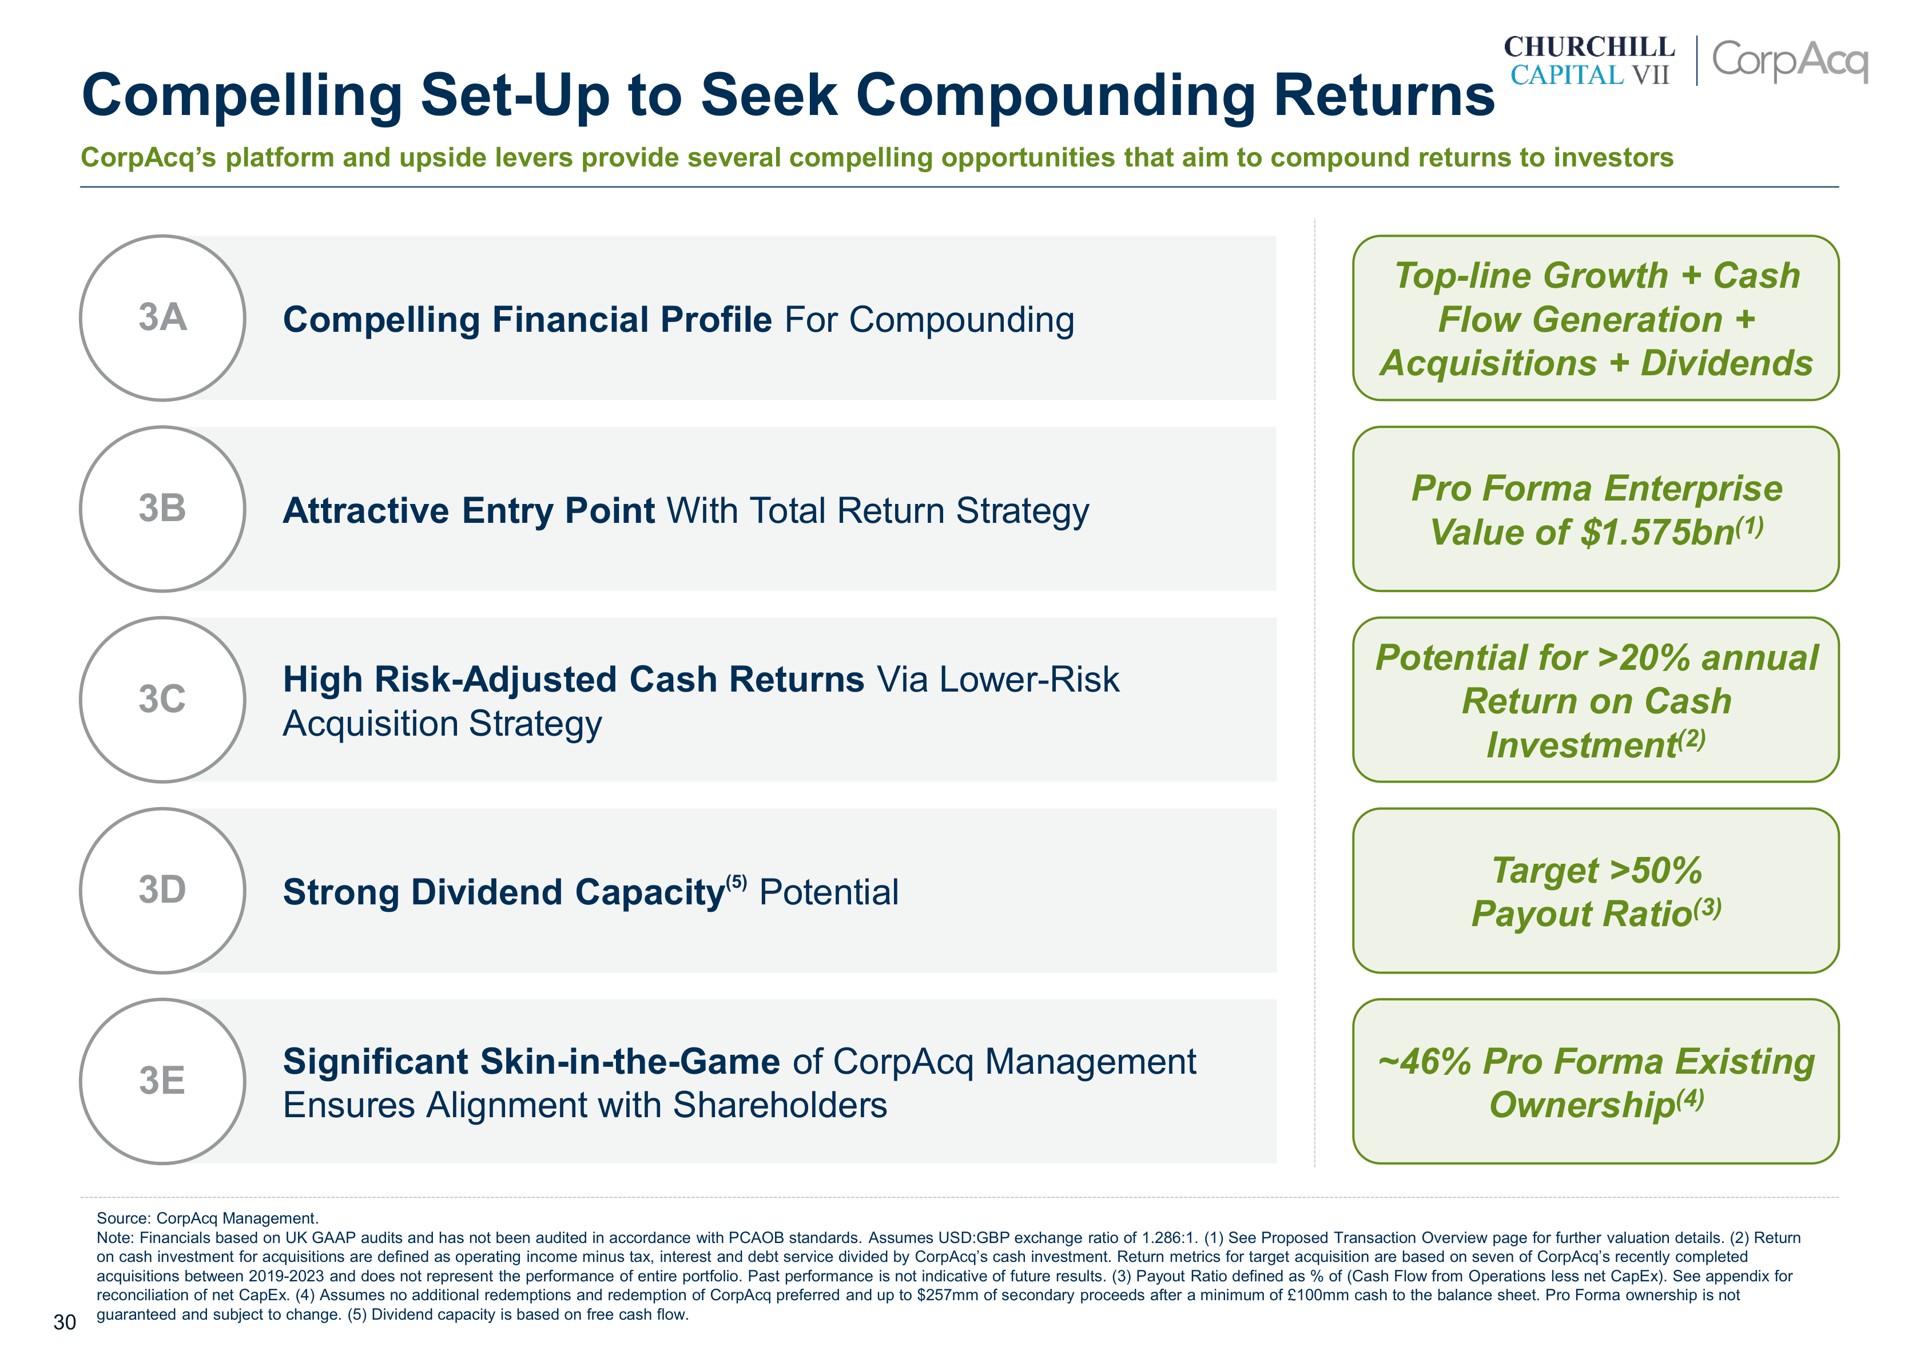 compelling set up to seek compounding returns a compelling financial profile for compounding attractive entry point with total return strategy high risk adjusted cash returns via lower risk acquisition strategy strong dividend capacity potential top line growth cash flow generation acquisitions dividends pro enterprise value of potential for annual return on cash investment target ratio significant skin in the game of management ensures alignment with shareholders pro existing ownership | CorpAcq